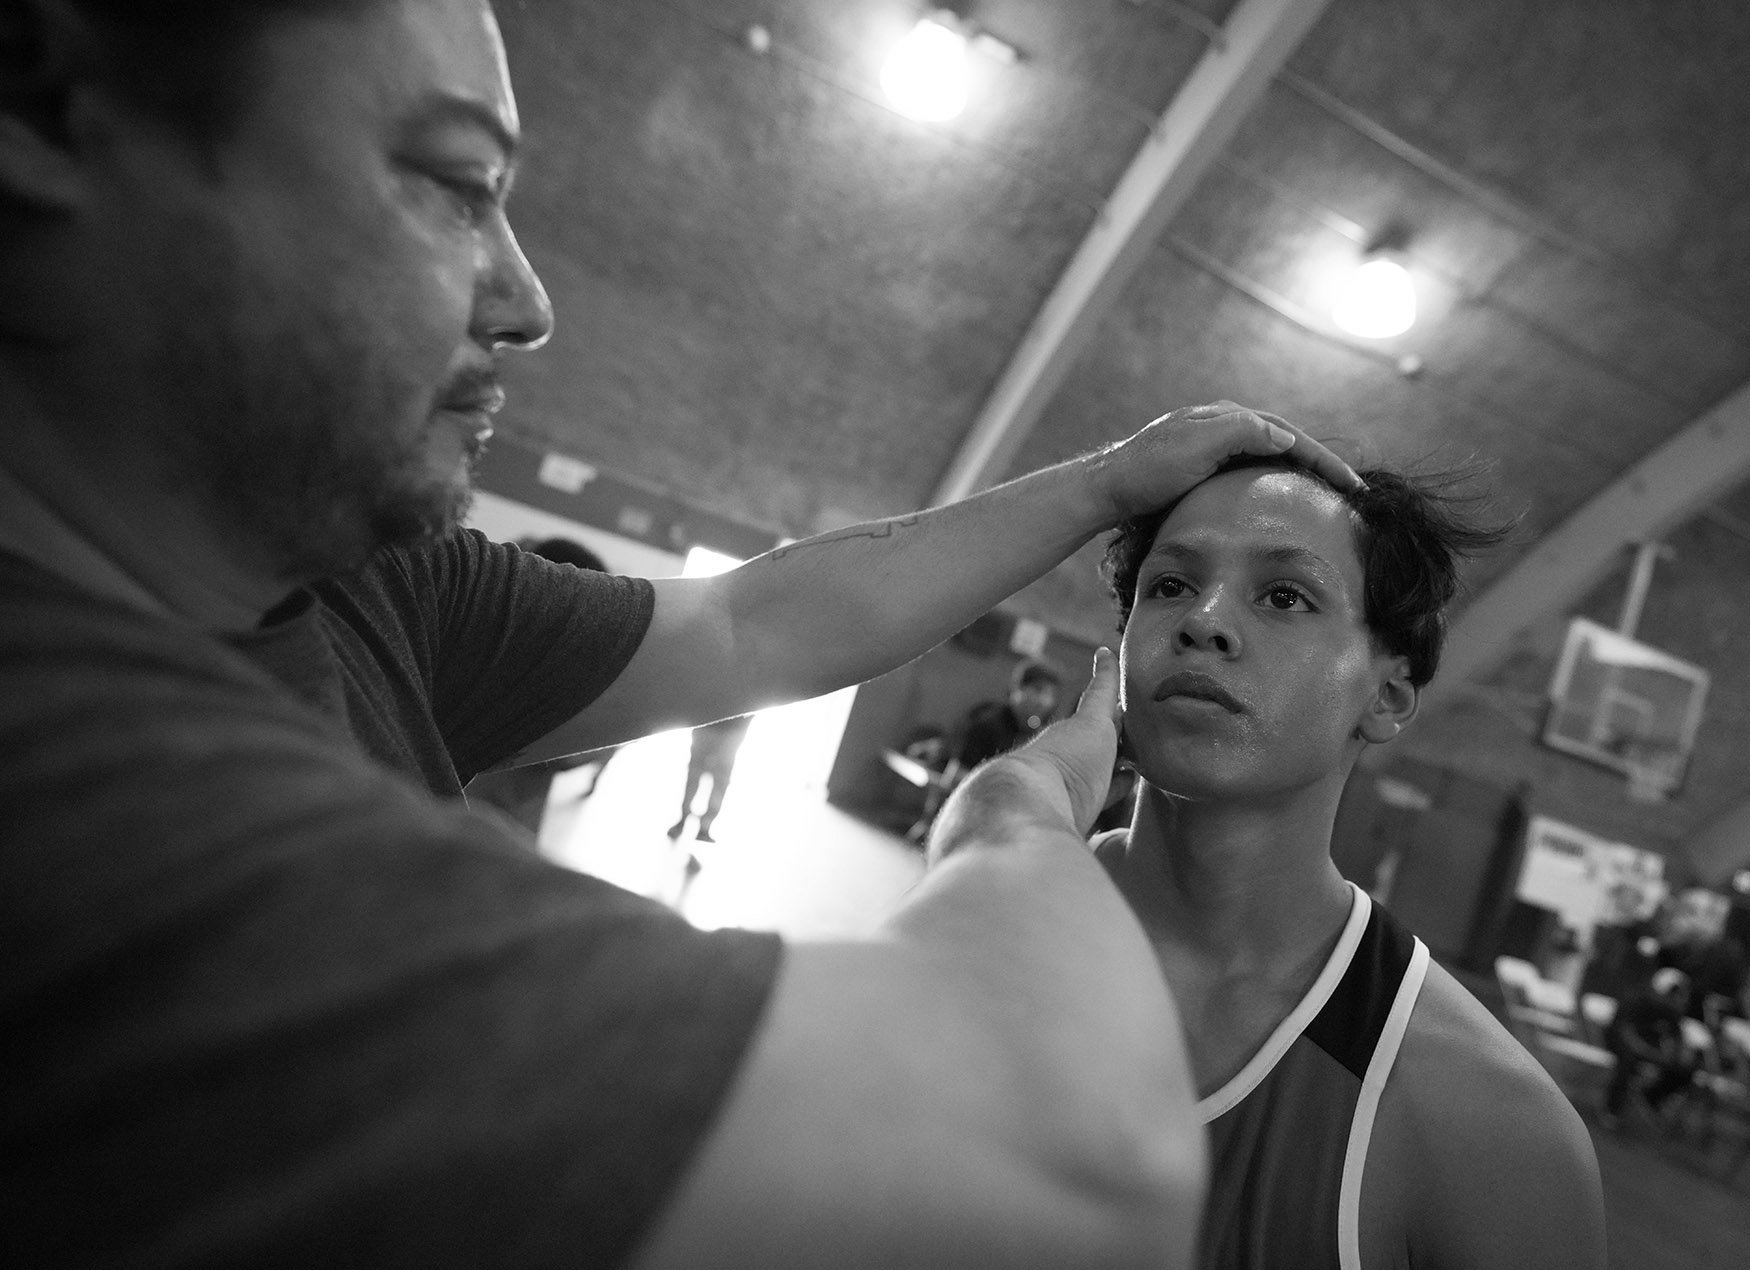  Mondo Castillo prepares his boxer Miguel Rosales Jr. prior to his bout during the annual amateur boxing show staged by the Duarte Boxing Club at Duarte High School in Duarte on Saturday, August 13, 2022.  